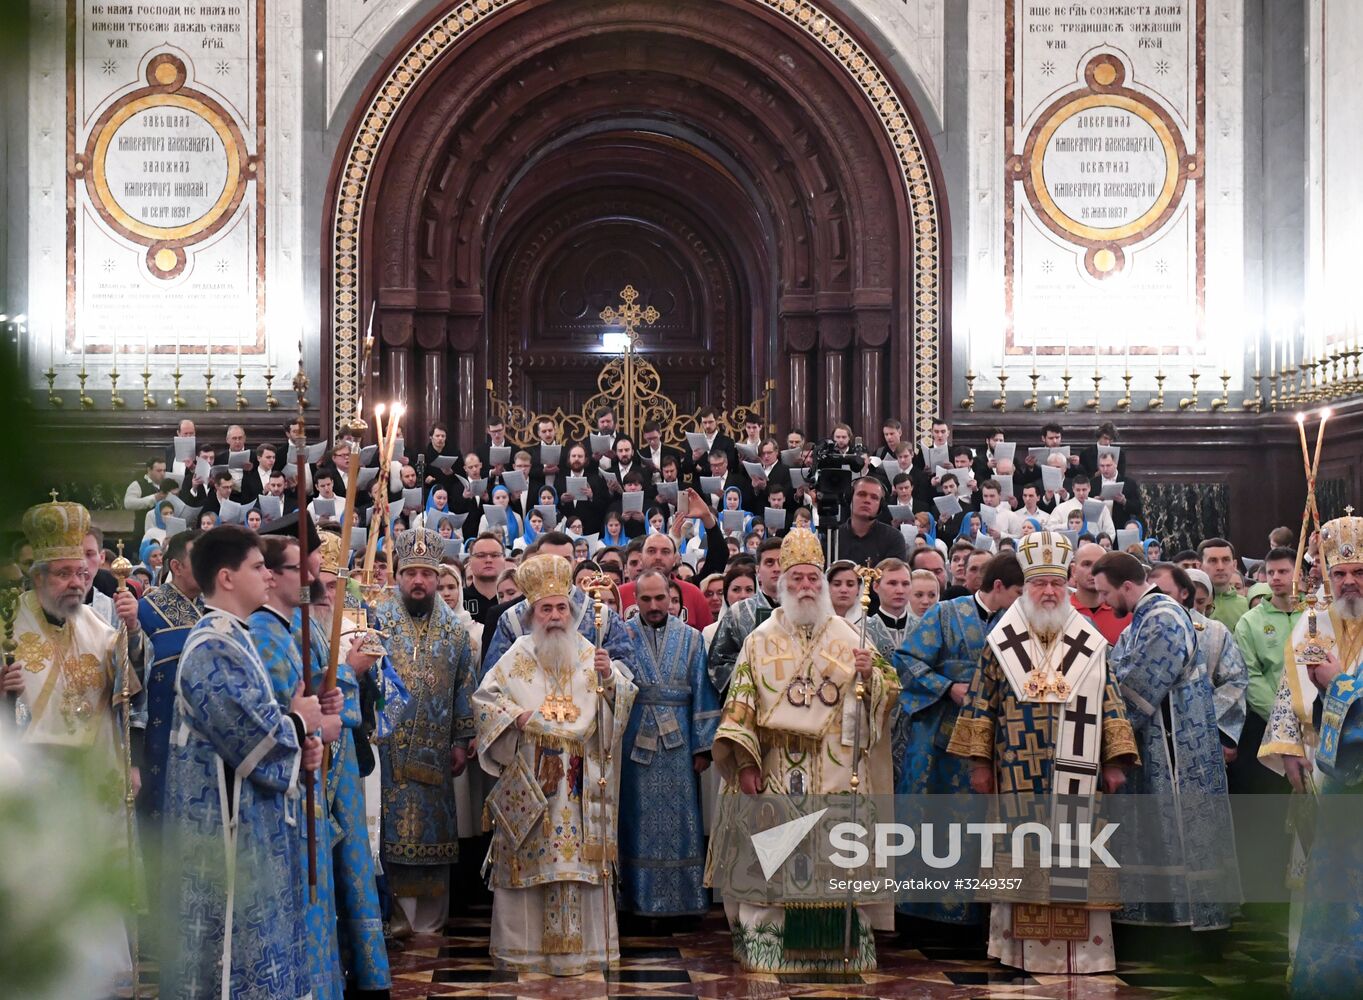 Divine Liturgy in Cathedral of Christ the Savior